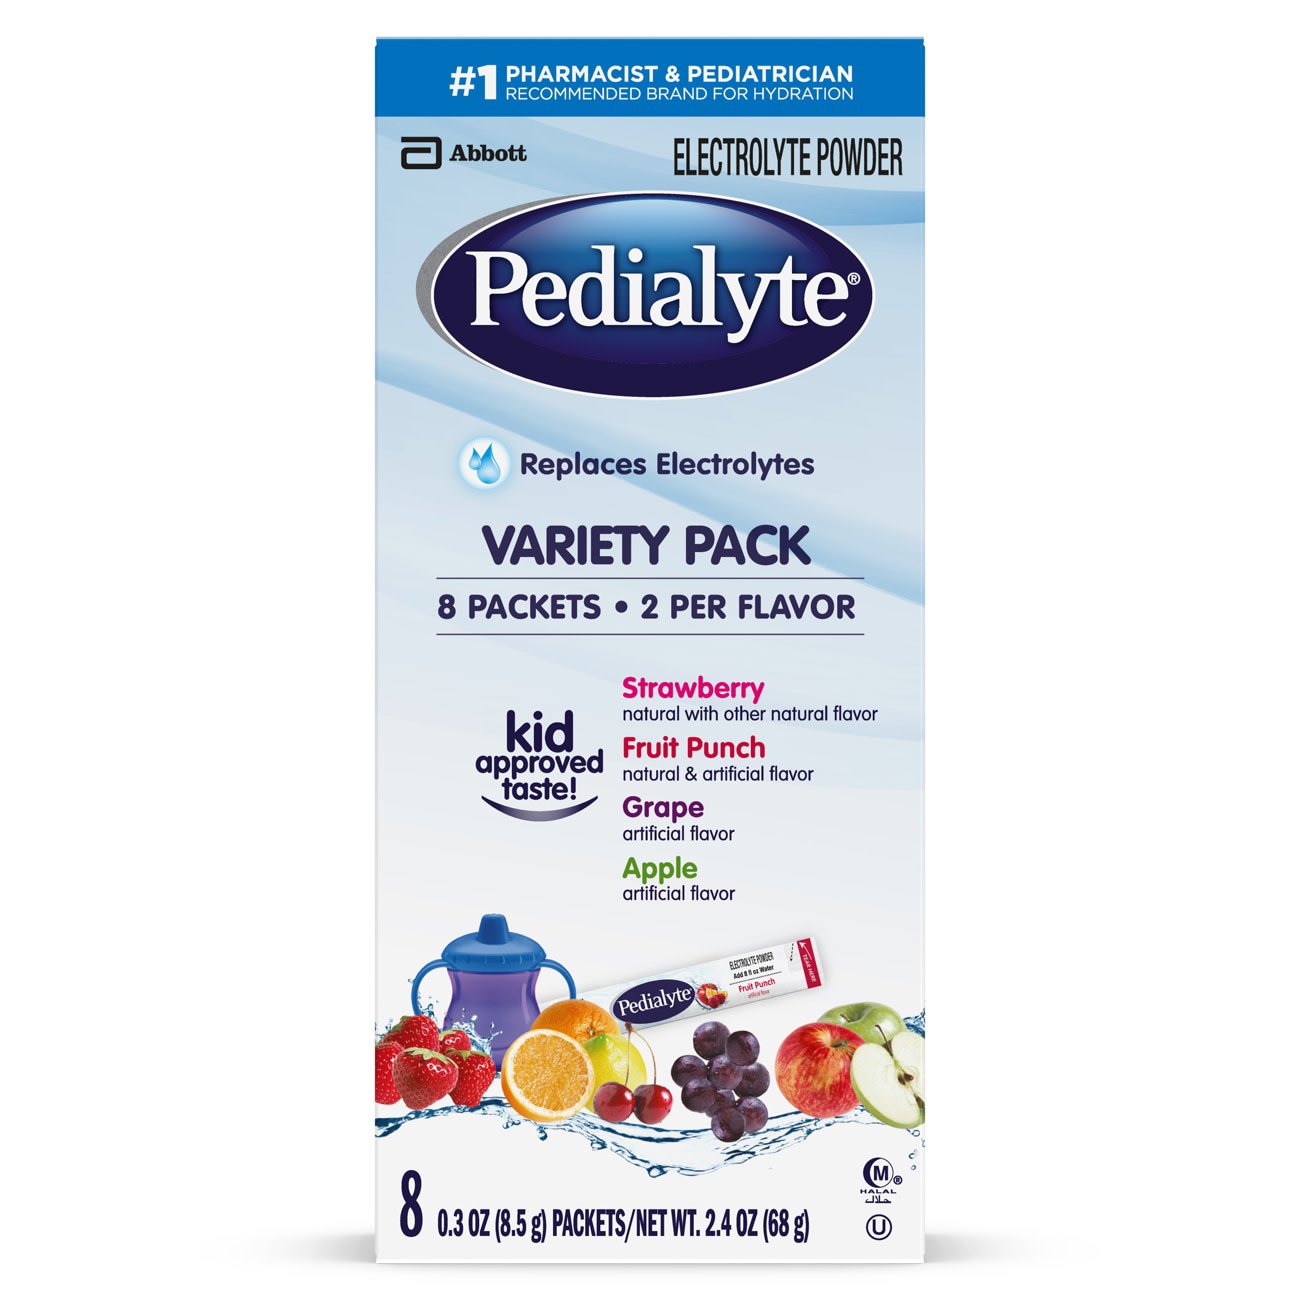 Pedialyte Powder Packs Pediatric Oral Electrolyte Solution, Assorted Flavors, 0.6 oz. Packet -Carton of 8